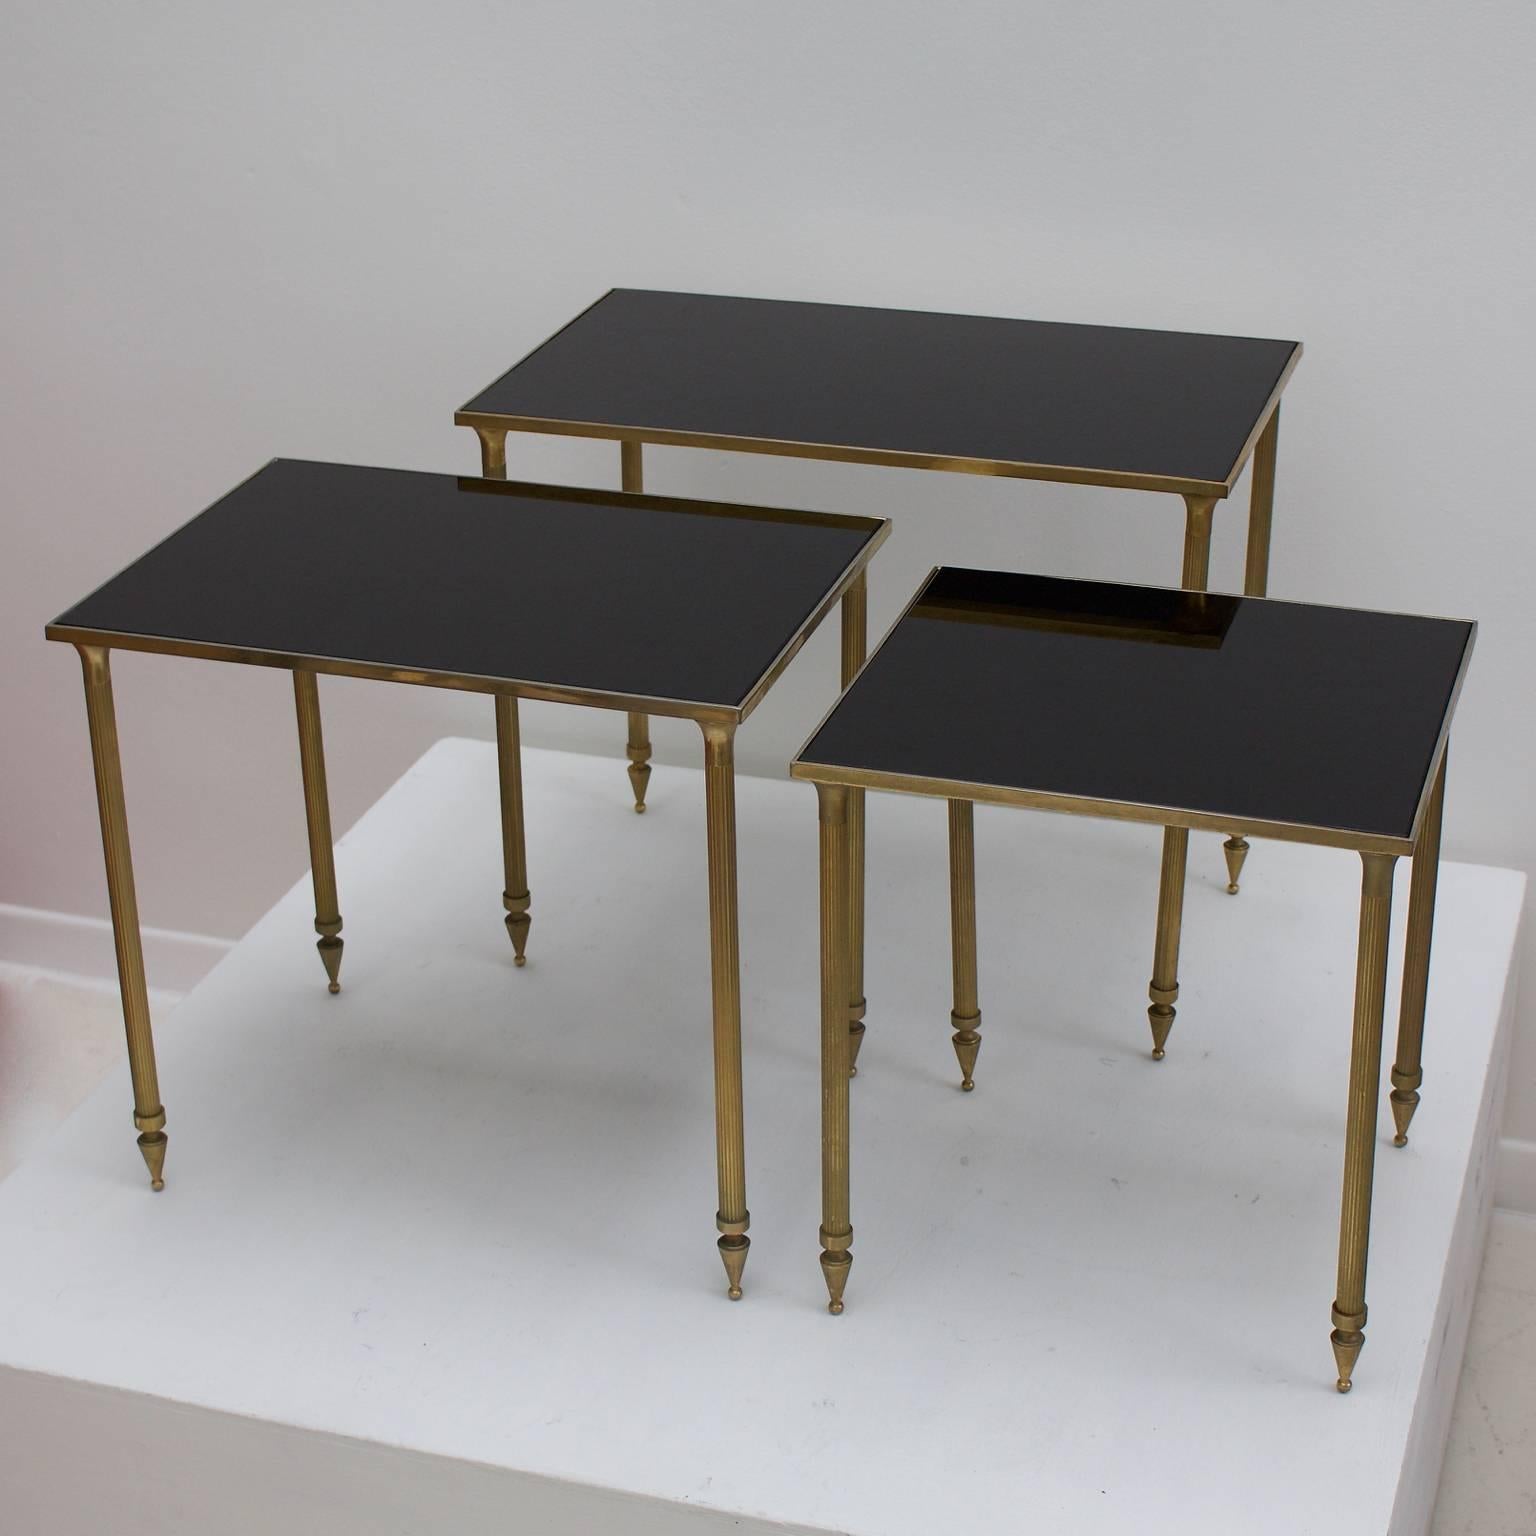 Set of three nesting tables with black glass tops and brass-finished frames, in Hollywood Regency style. European, probably 1970s.

The tables are in very nice vintage condition with an attractive overall patina in line with age. There is light